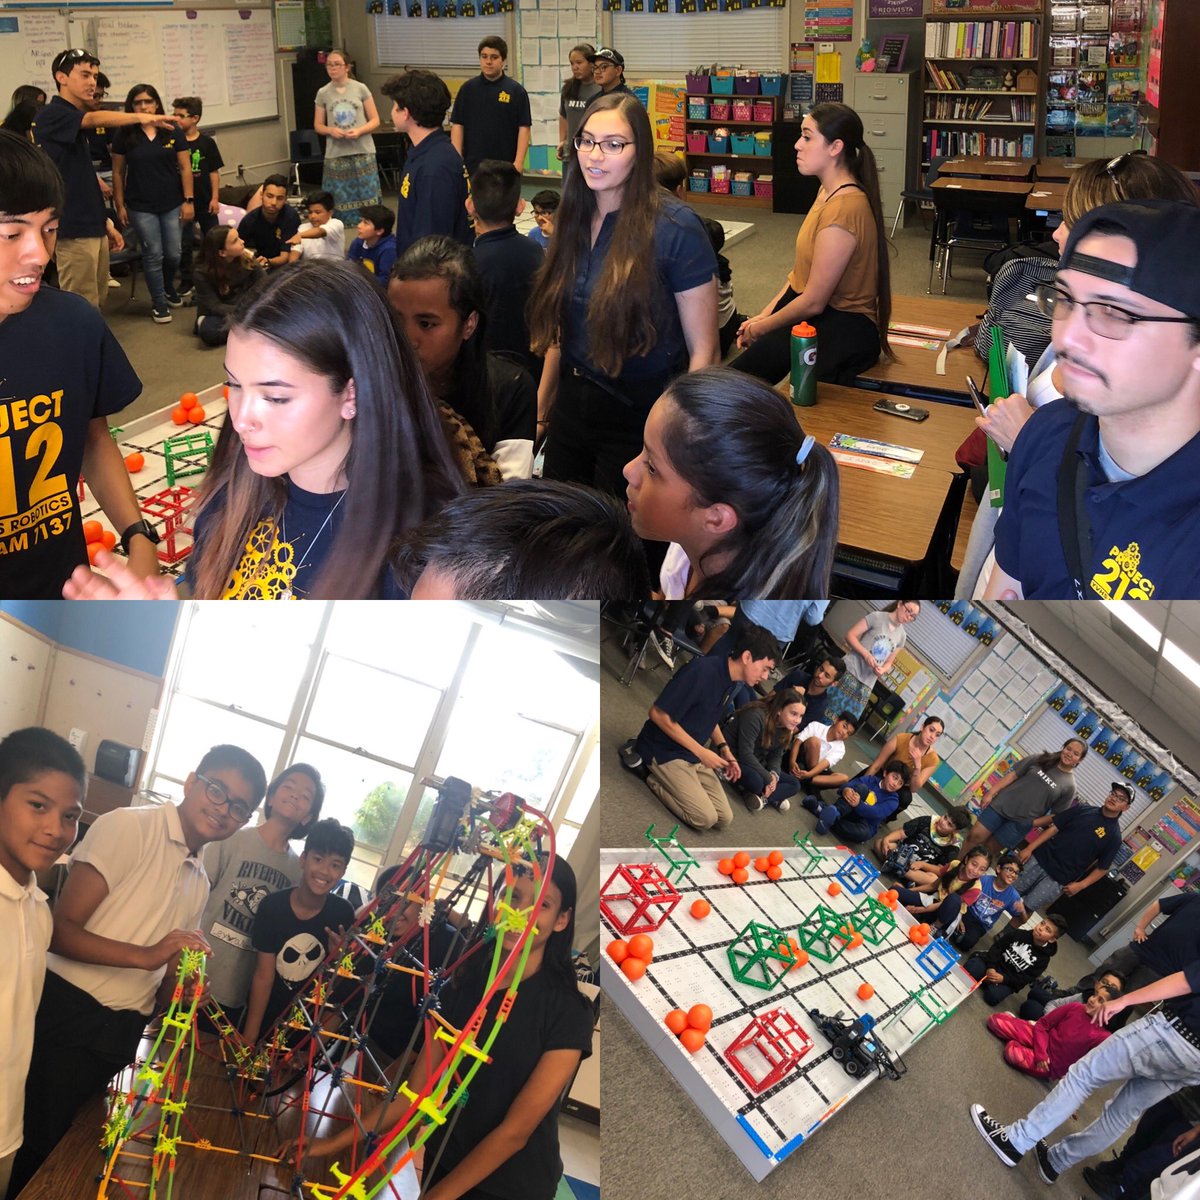 Awesome to see the wonderful activities and amazing people behind our @CARES_ASP programs! And my tour guides! Awesome! 17 programs strong! @RioVistaMDUSD @riovistaCARES @MtDiabloUSD @LizLanLaw